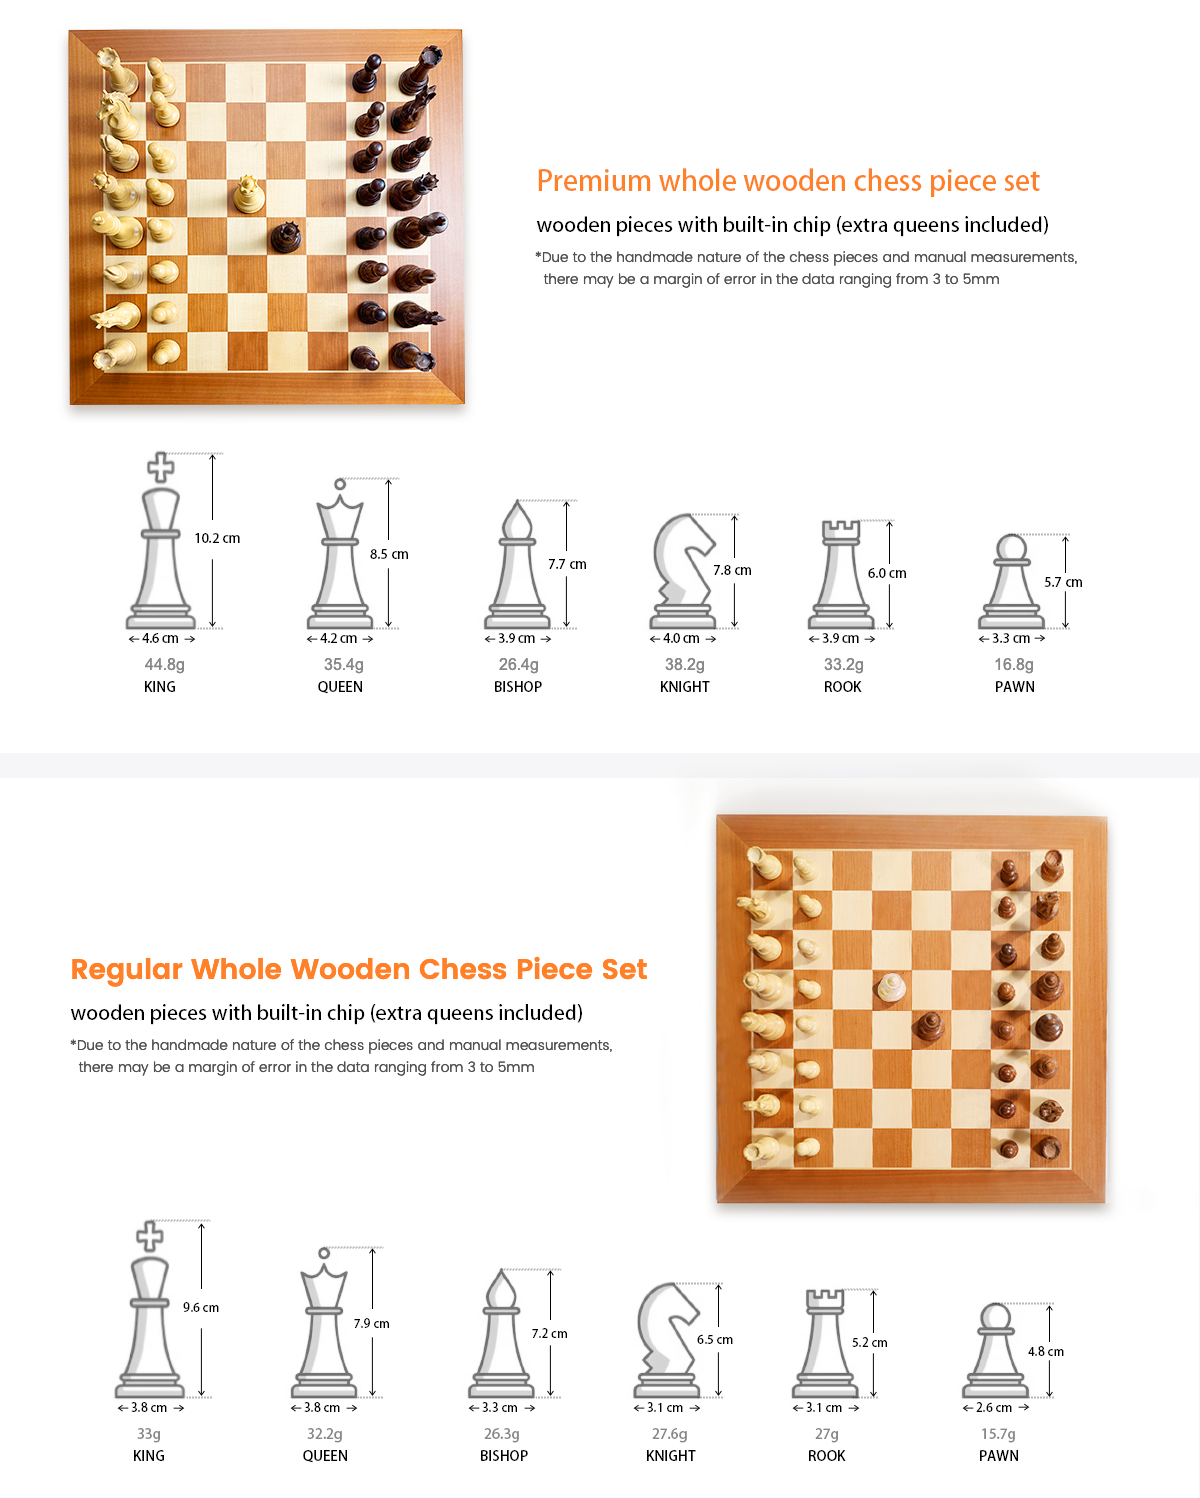 Buy Full sized wooden Electronic Chess Set with wooden pieces